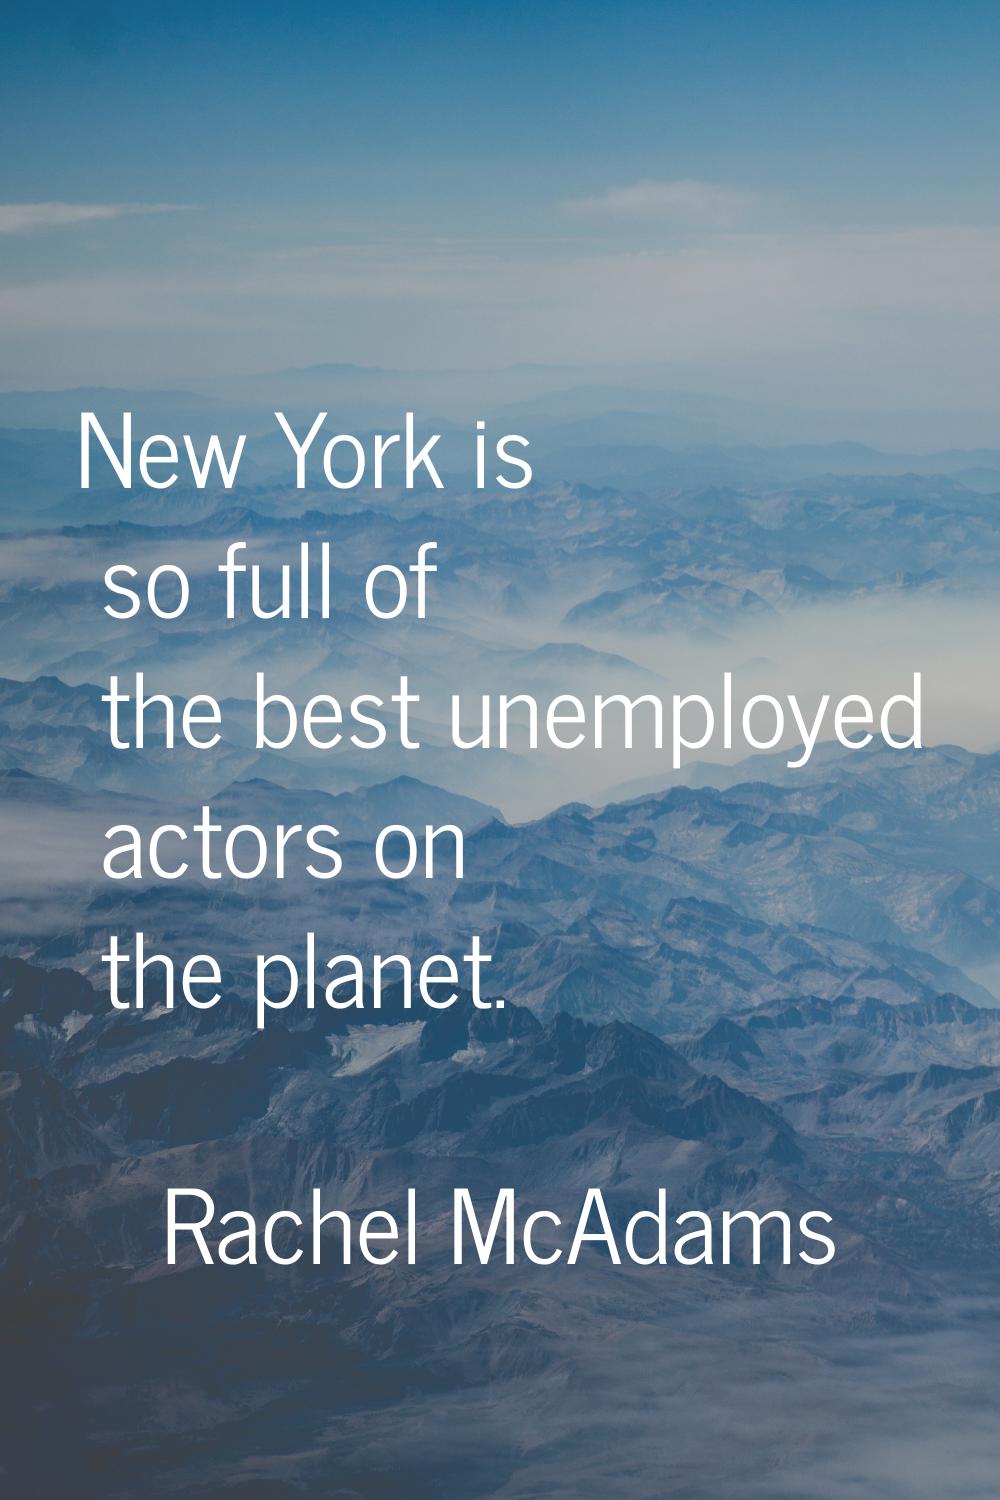 New York is so full of the best unemployed actors on the planet.